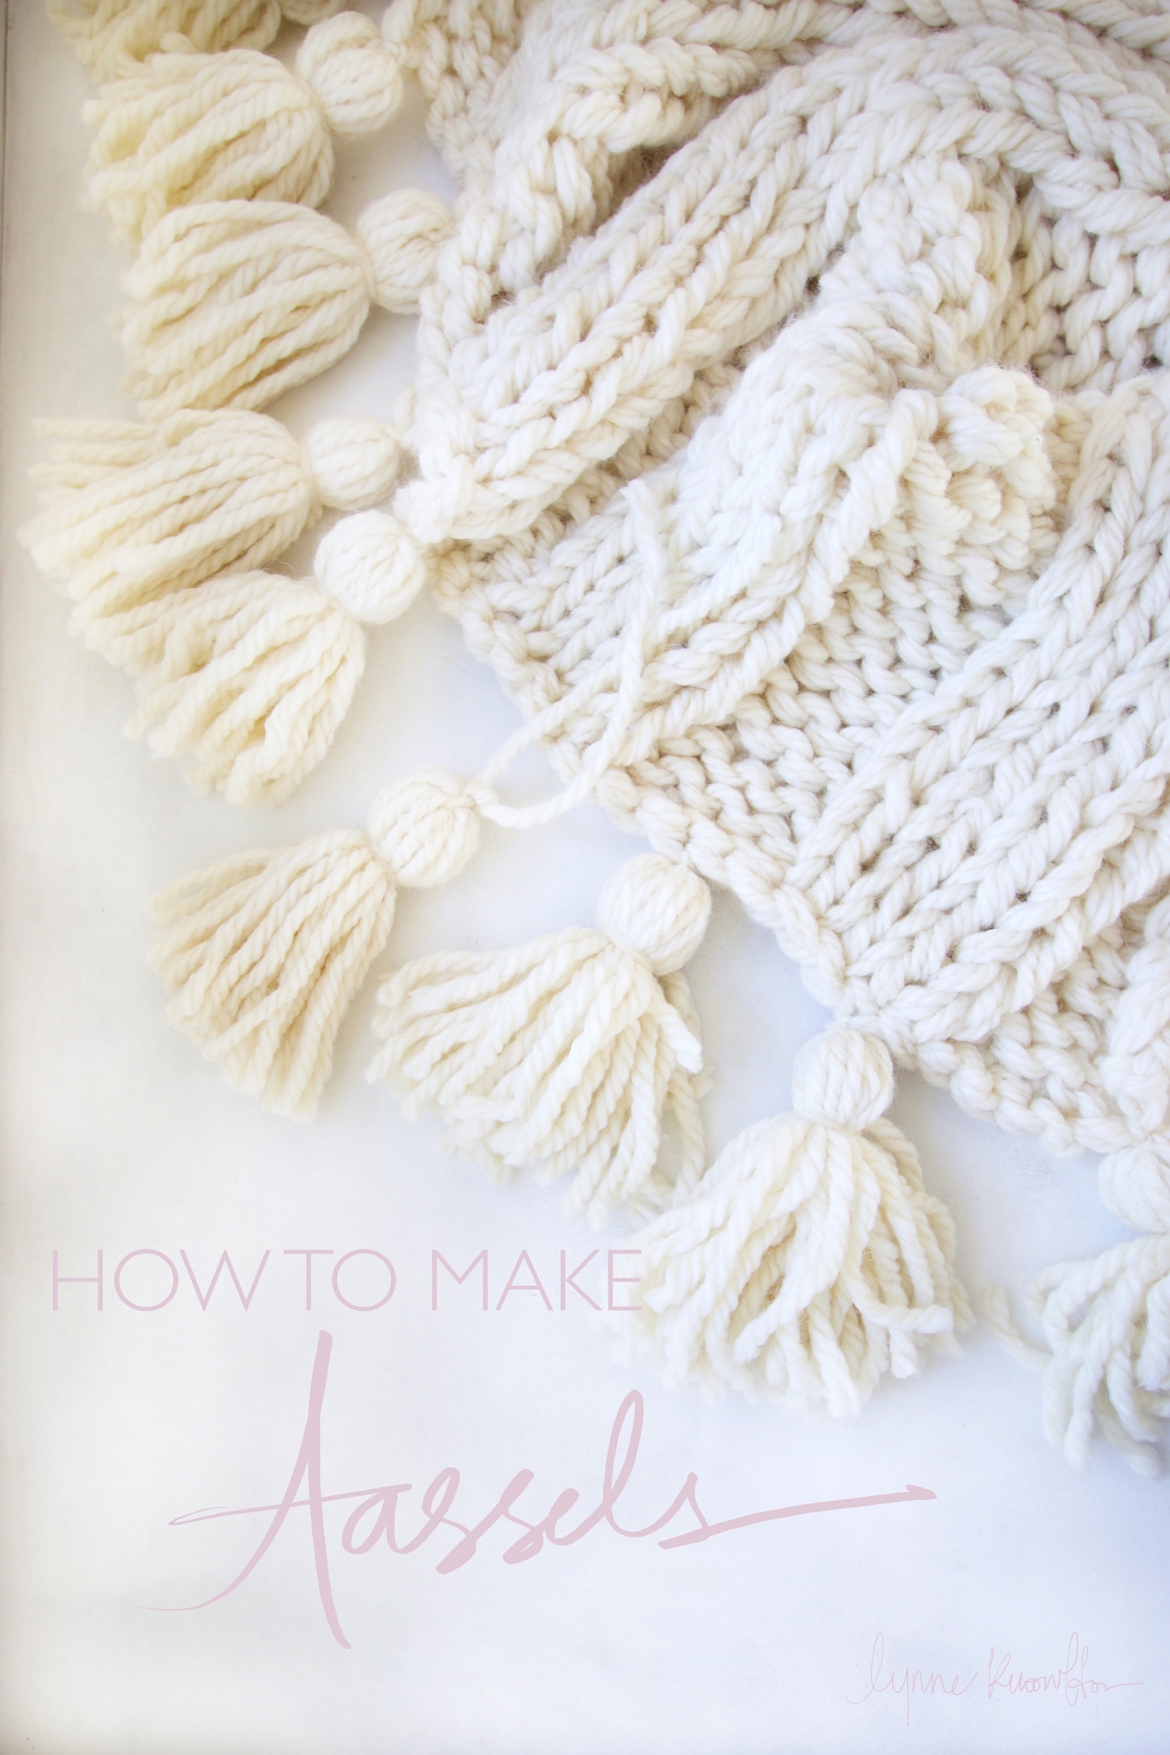 Step by Step Tassel Tutorial : How to make tassels for your chunky wool blanket.  These knit tassels will work for any blanket, knit blanket, or throw blanket. Easy to follow directions on DESIGN THE LIFE YOU WANT TO LIVE | LynneKnowlton.com